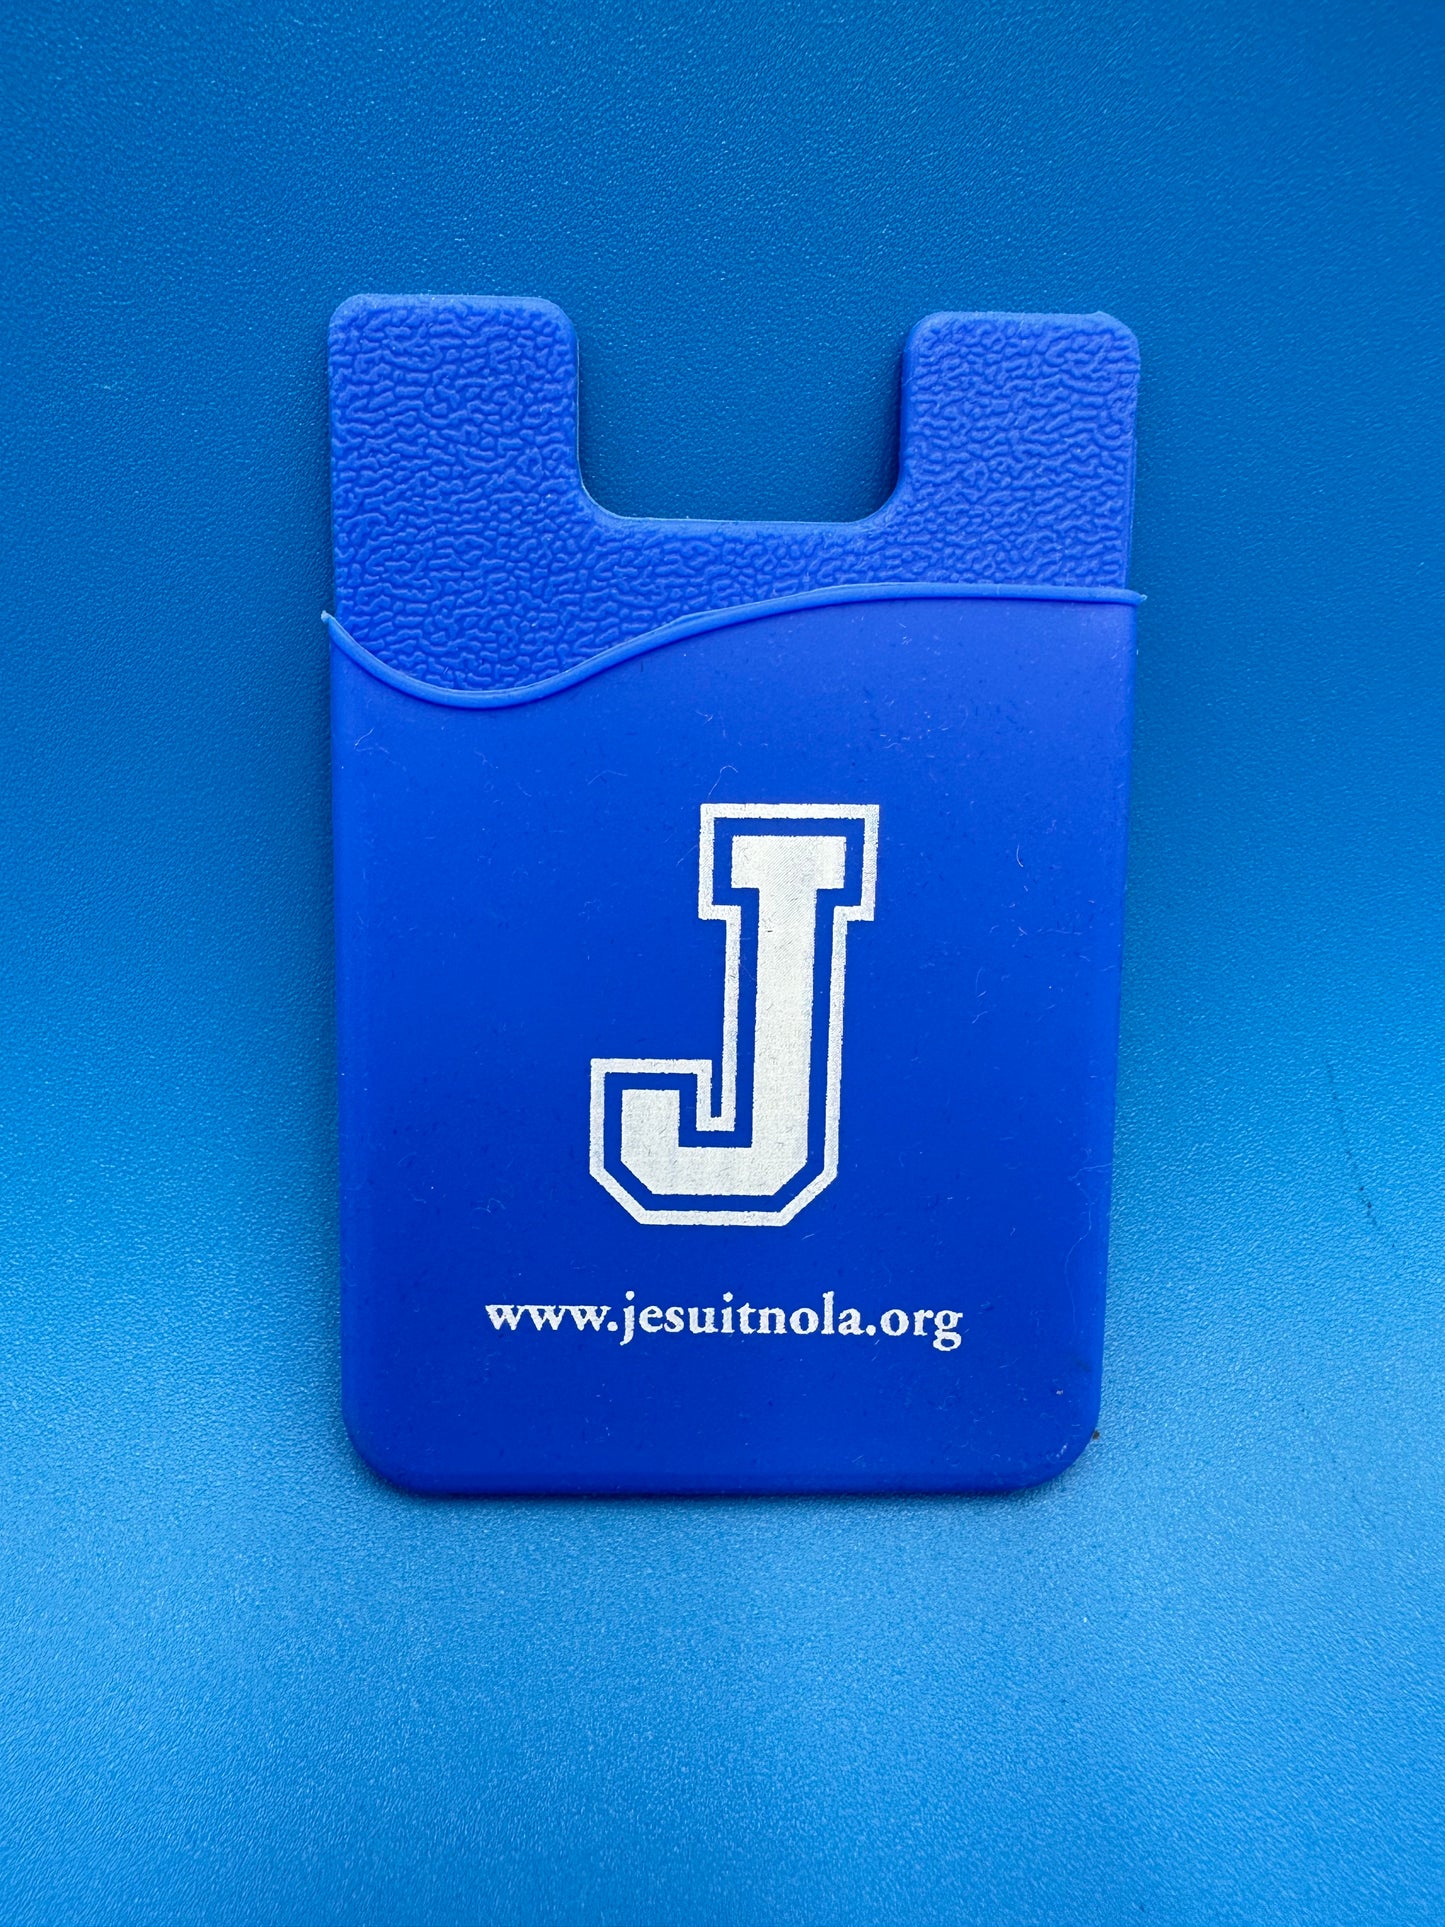 Silicone stick-on phone wallet credit card or I.D. holder with Jesuit logo.